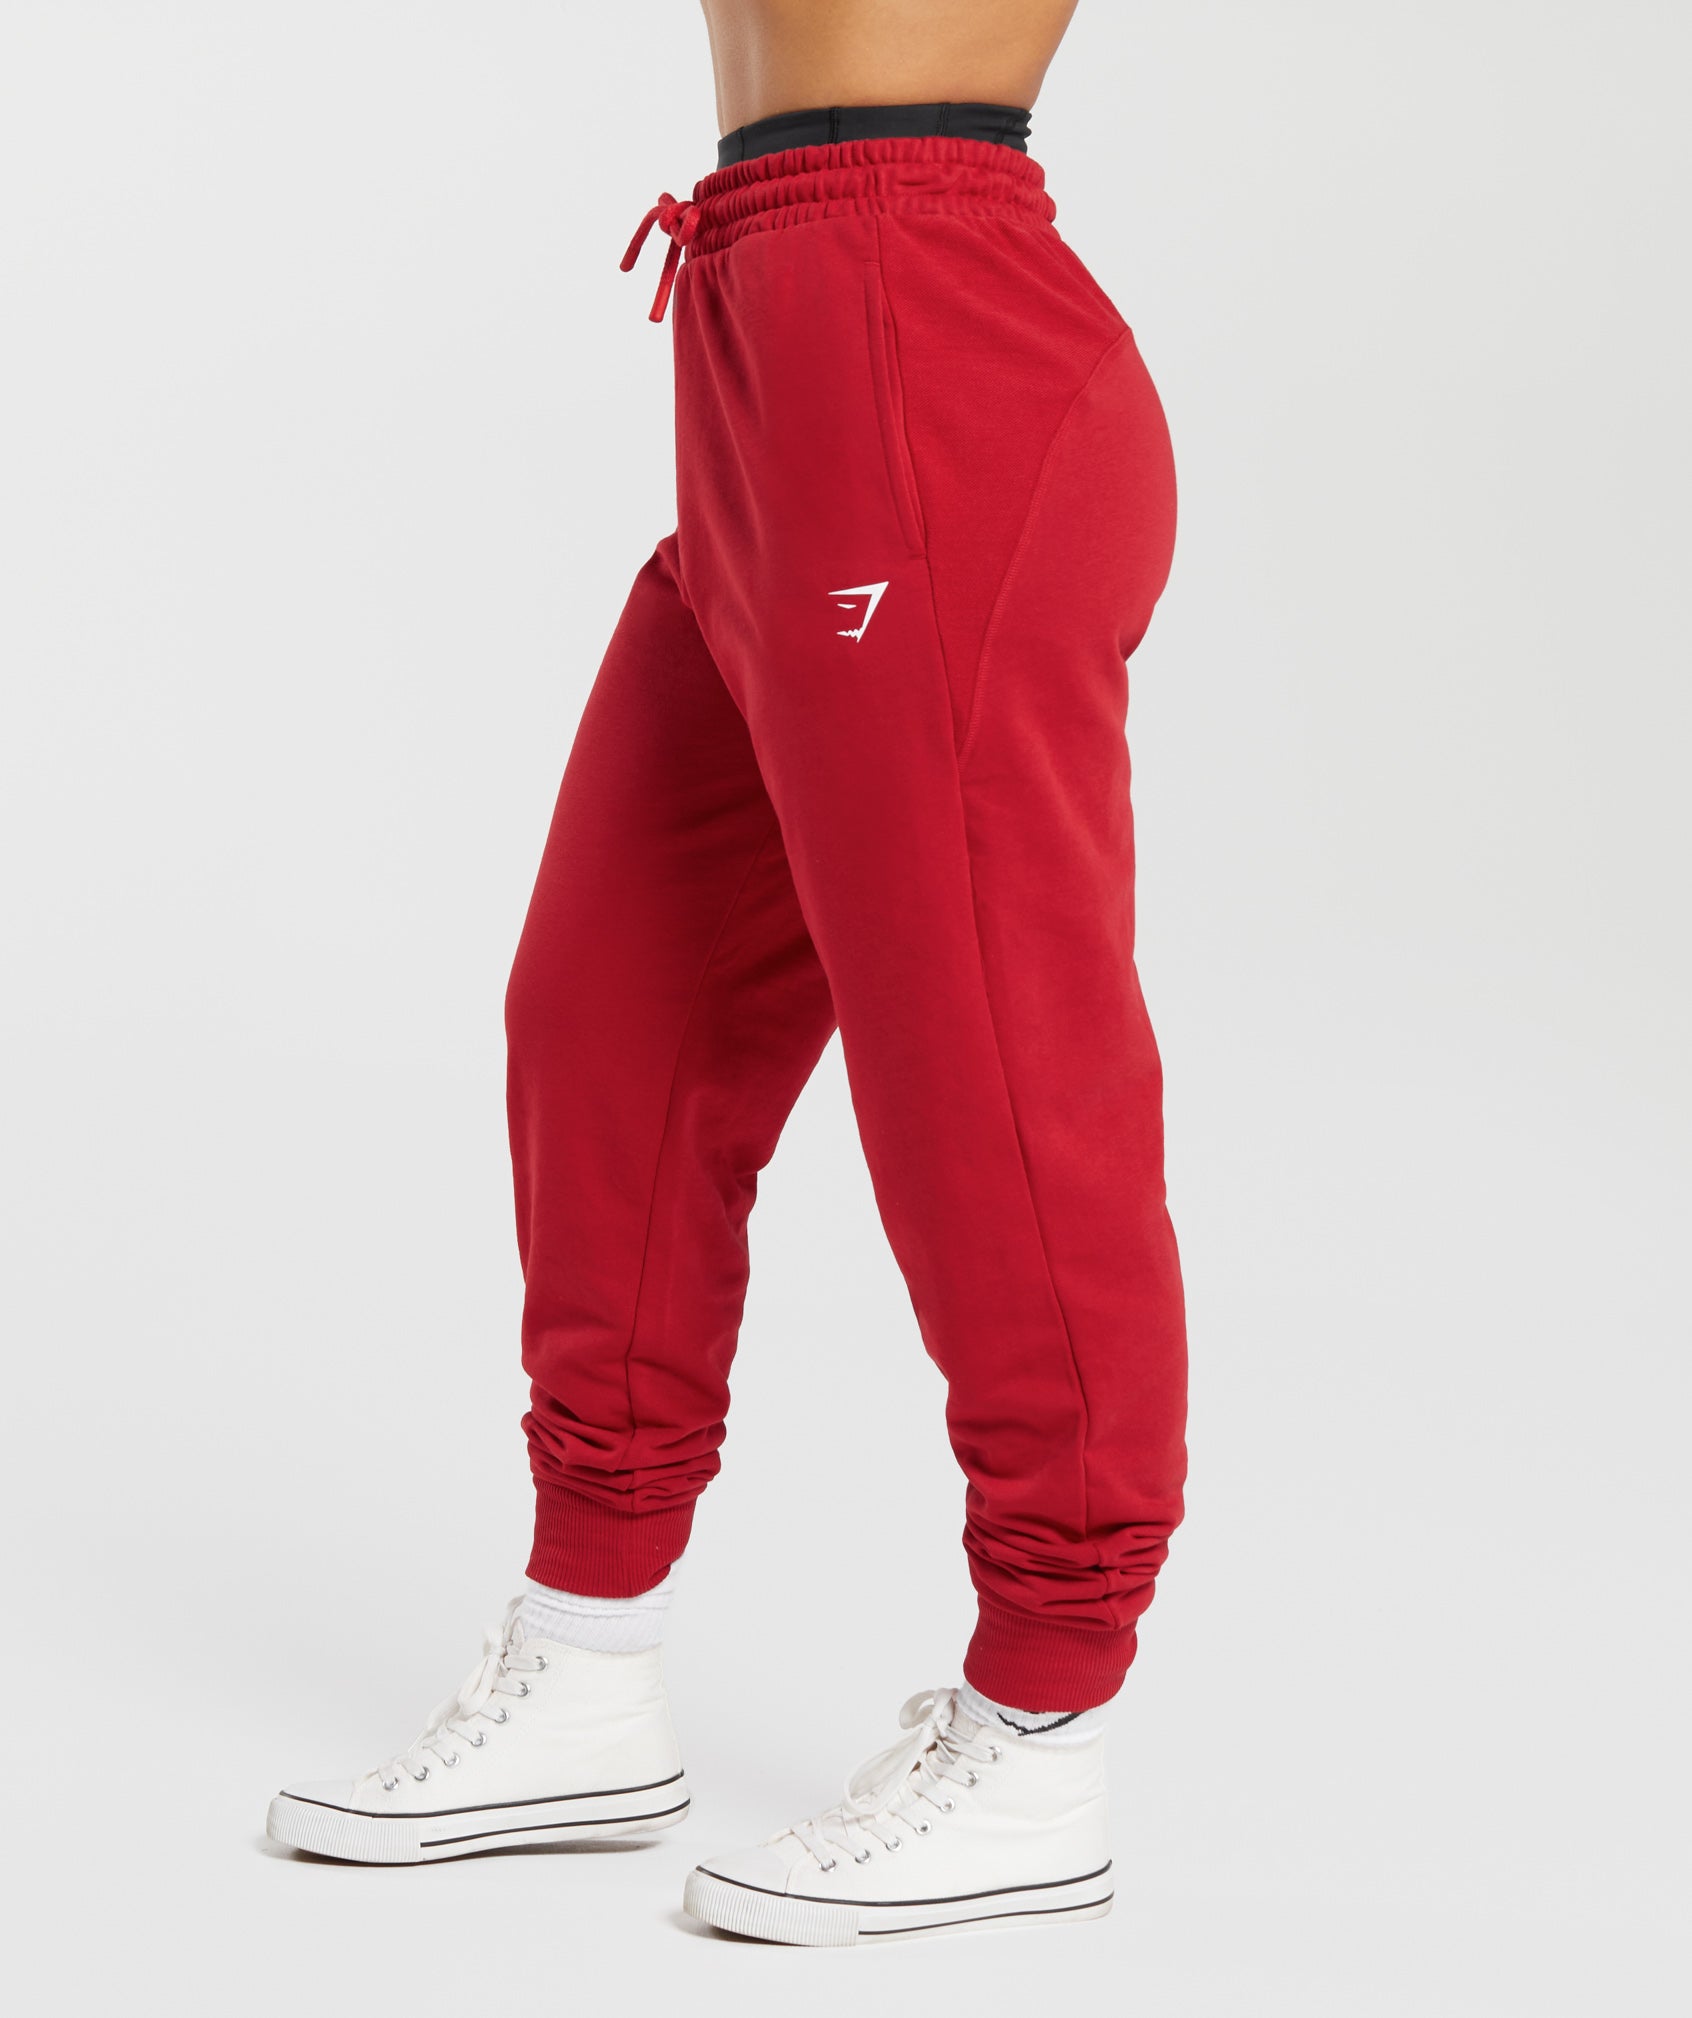 GS Power Joggers in Red - view 3